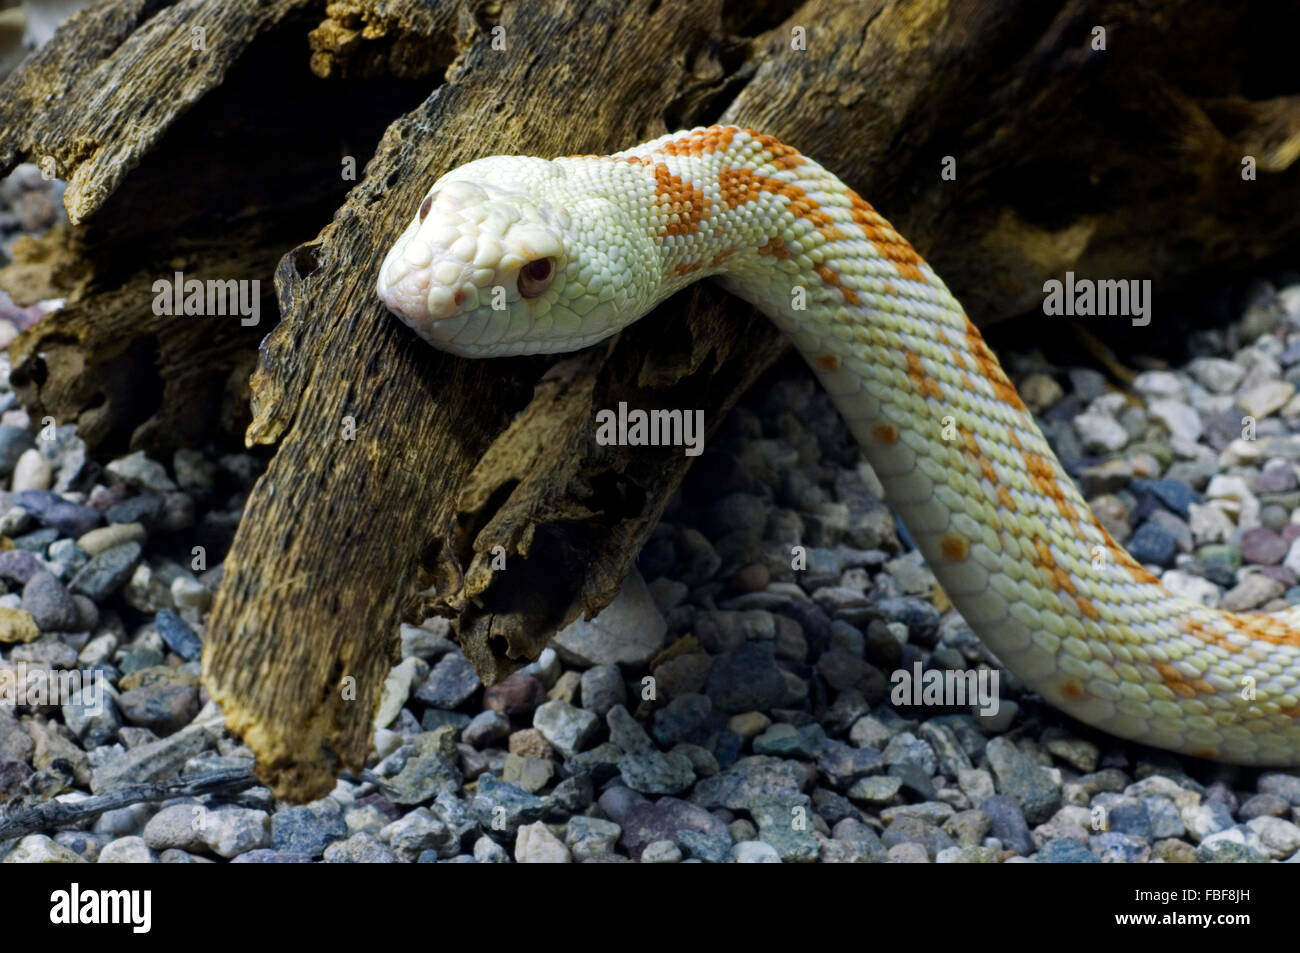 Pacific gopher snake / Sonoran gopher snake / western bullsnake (Pituophis catenifer) endemic to North America Stock Photo